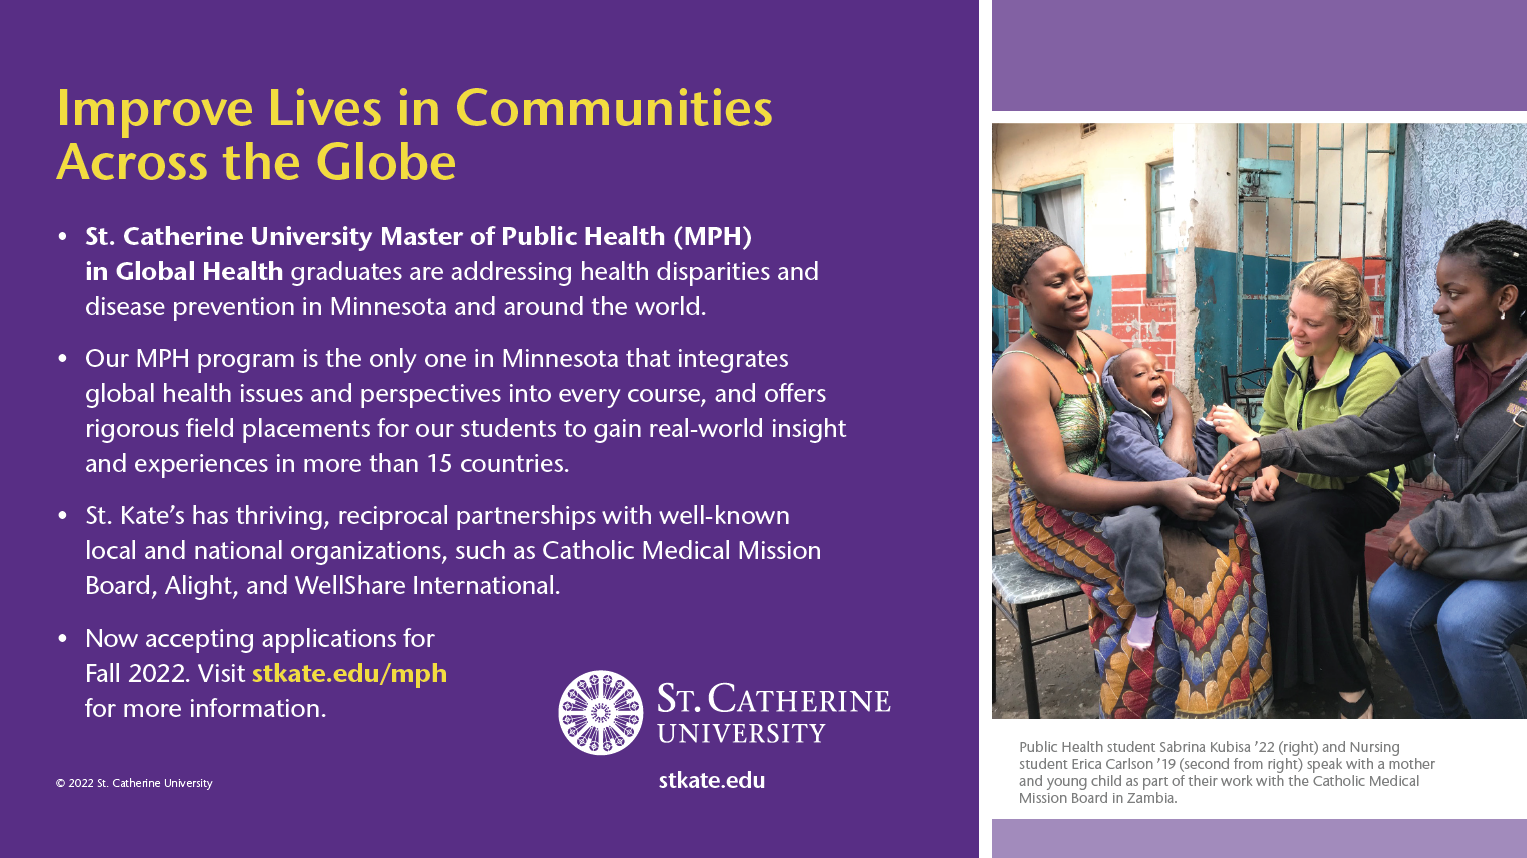 Improve Lives in Communities Across the Globe. St. Catherine University Master of Public Health (MPH) in Global Health graduates are addressing health disparities and disease prevention in Minnesota and around the world. Our MPH program is the only one in Minnesota that integrates global health issues and perspectives into every course, and o ers rigorous fi eld placements for our students to gain real-world insight and experiences in more than 15 countries. • St. Kate’s has thriving, reciprocal partnerships with well-known local and national organizations, such as Catholic Medical Mission Board, Alight, and WellShare International. • Now accepting applications for Fall 2022. Visit stkate.edu/mph for more information.